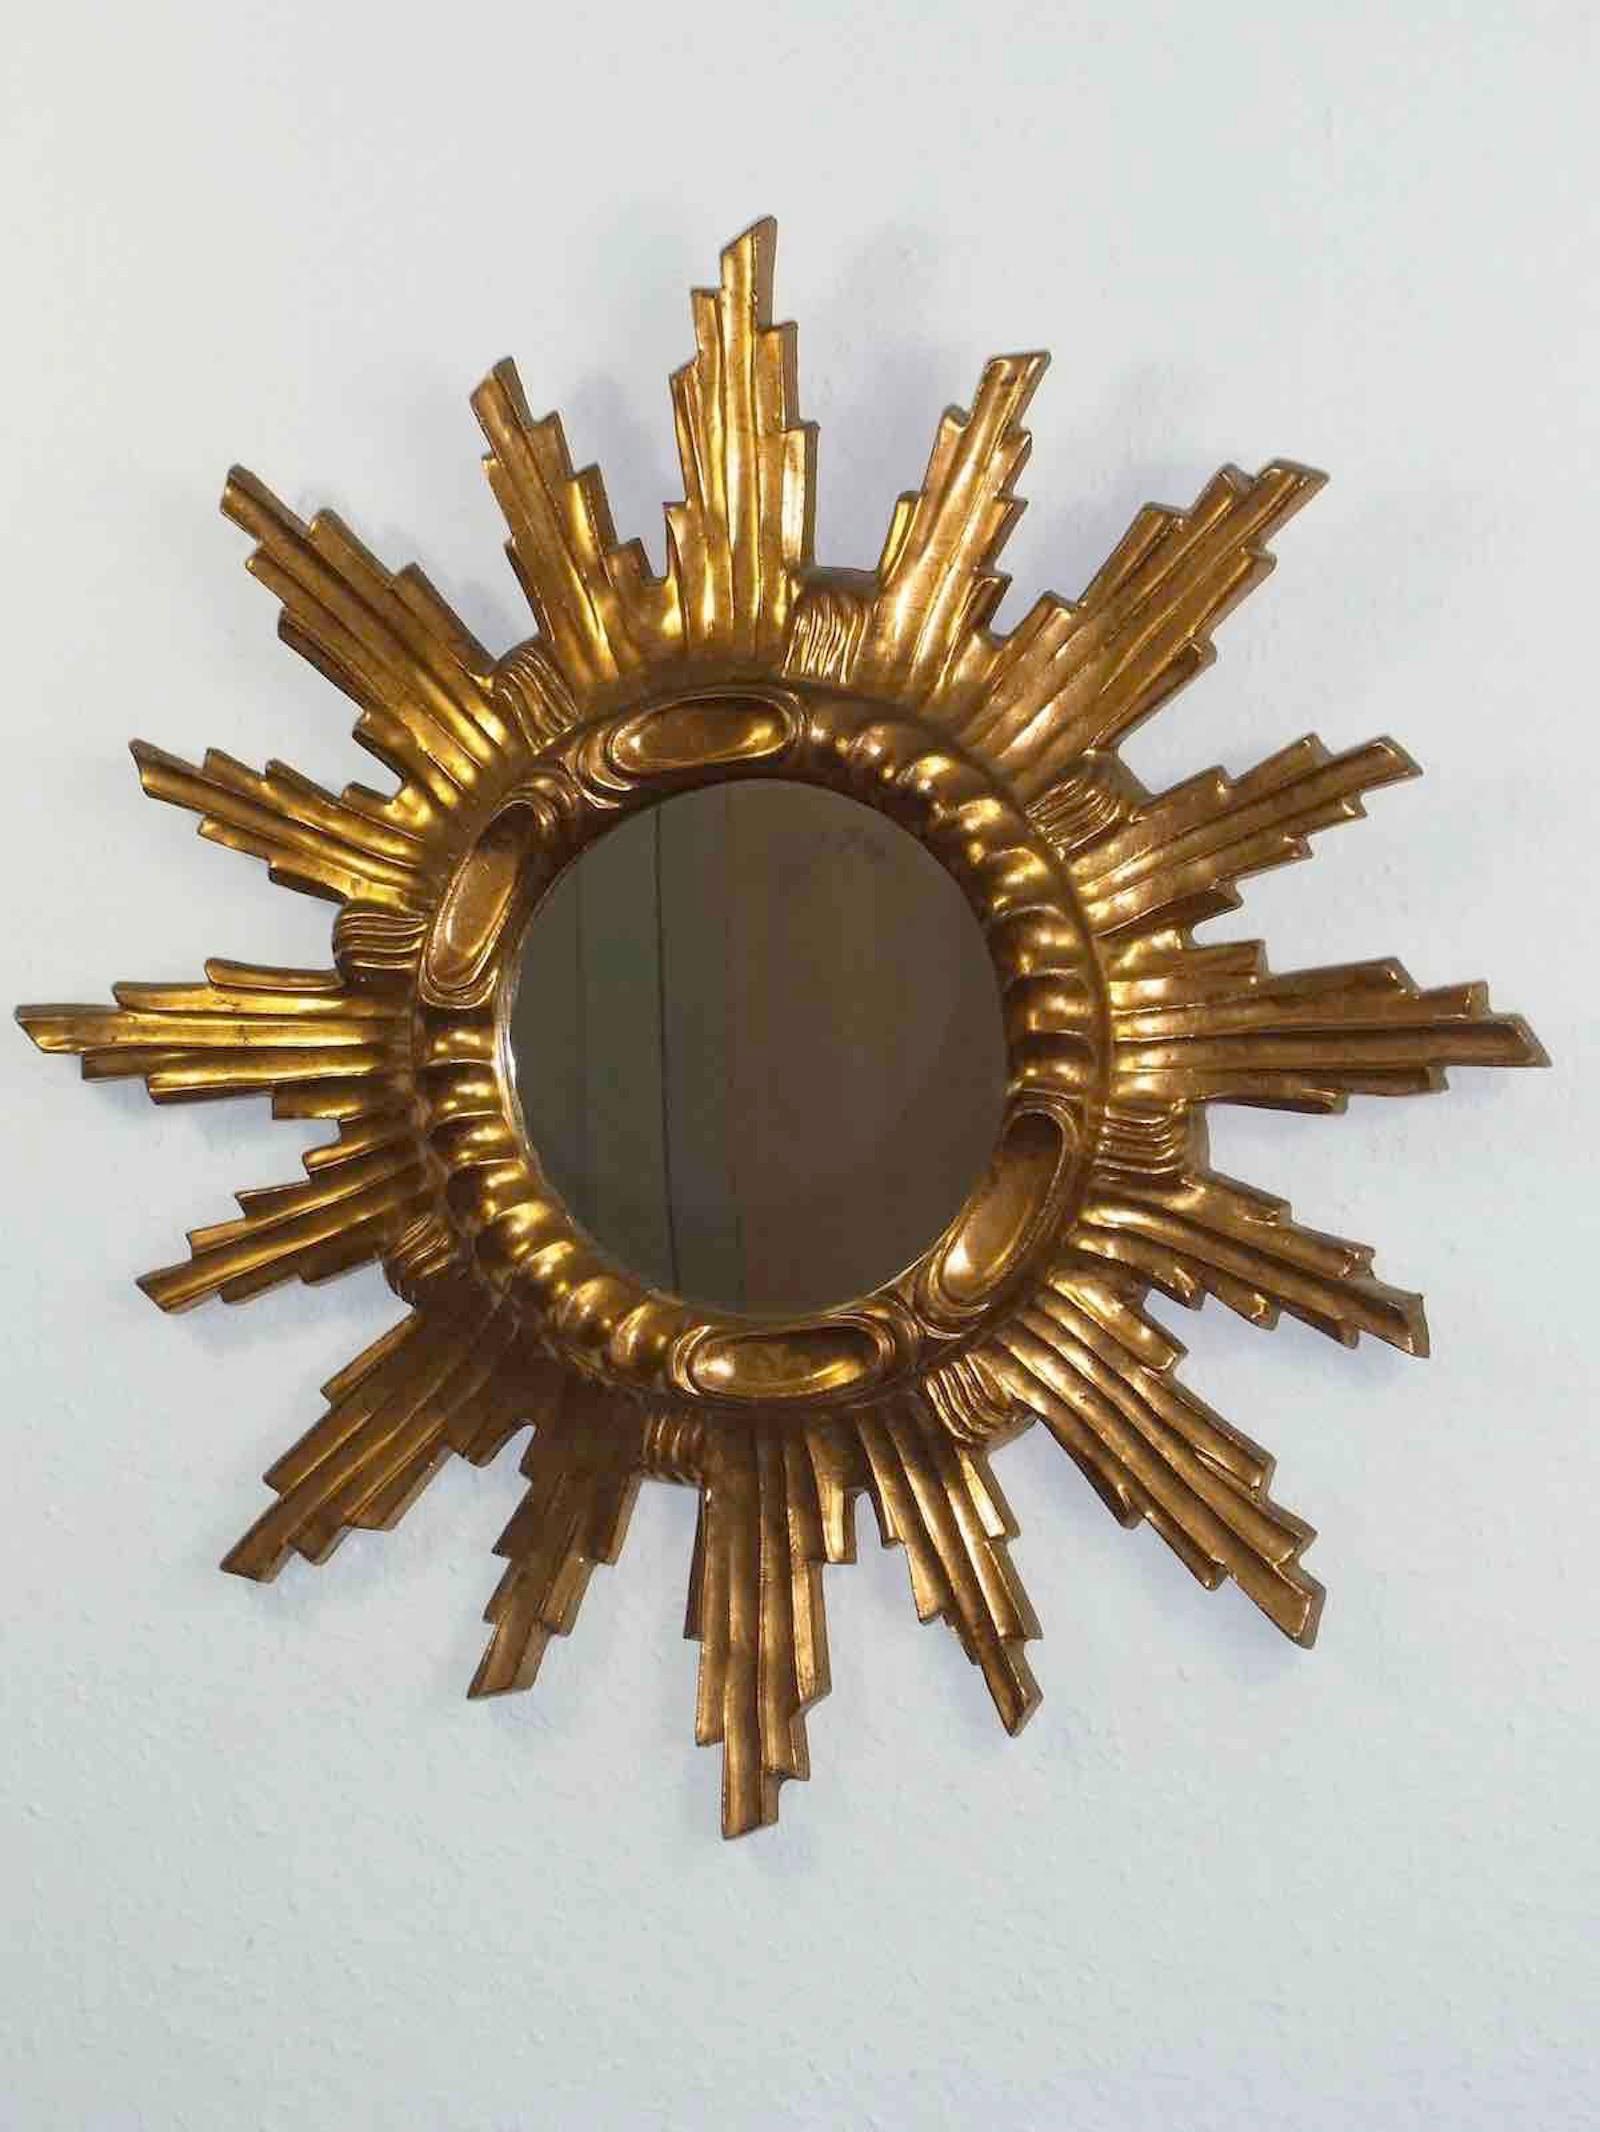 Italian sunburst or starburst mirror made of wood and composition. Gilded with nice gold paint. No chips, no cracks, no repairs. Ready to hang!